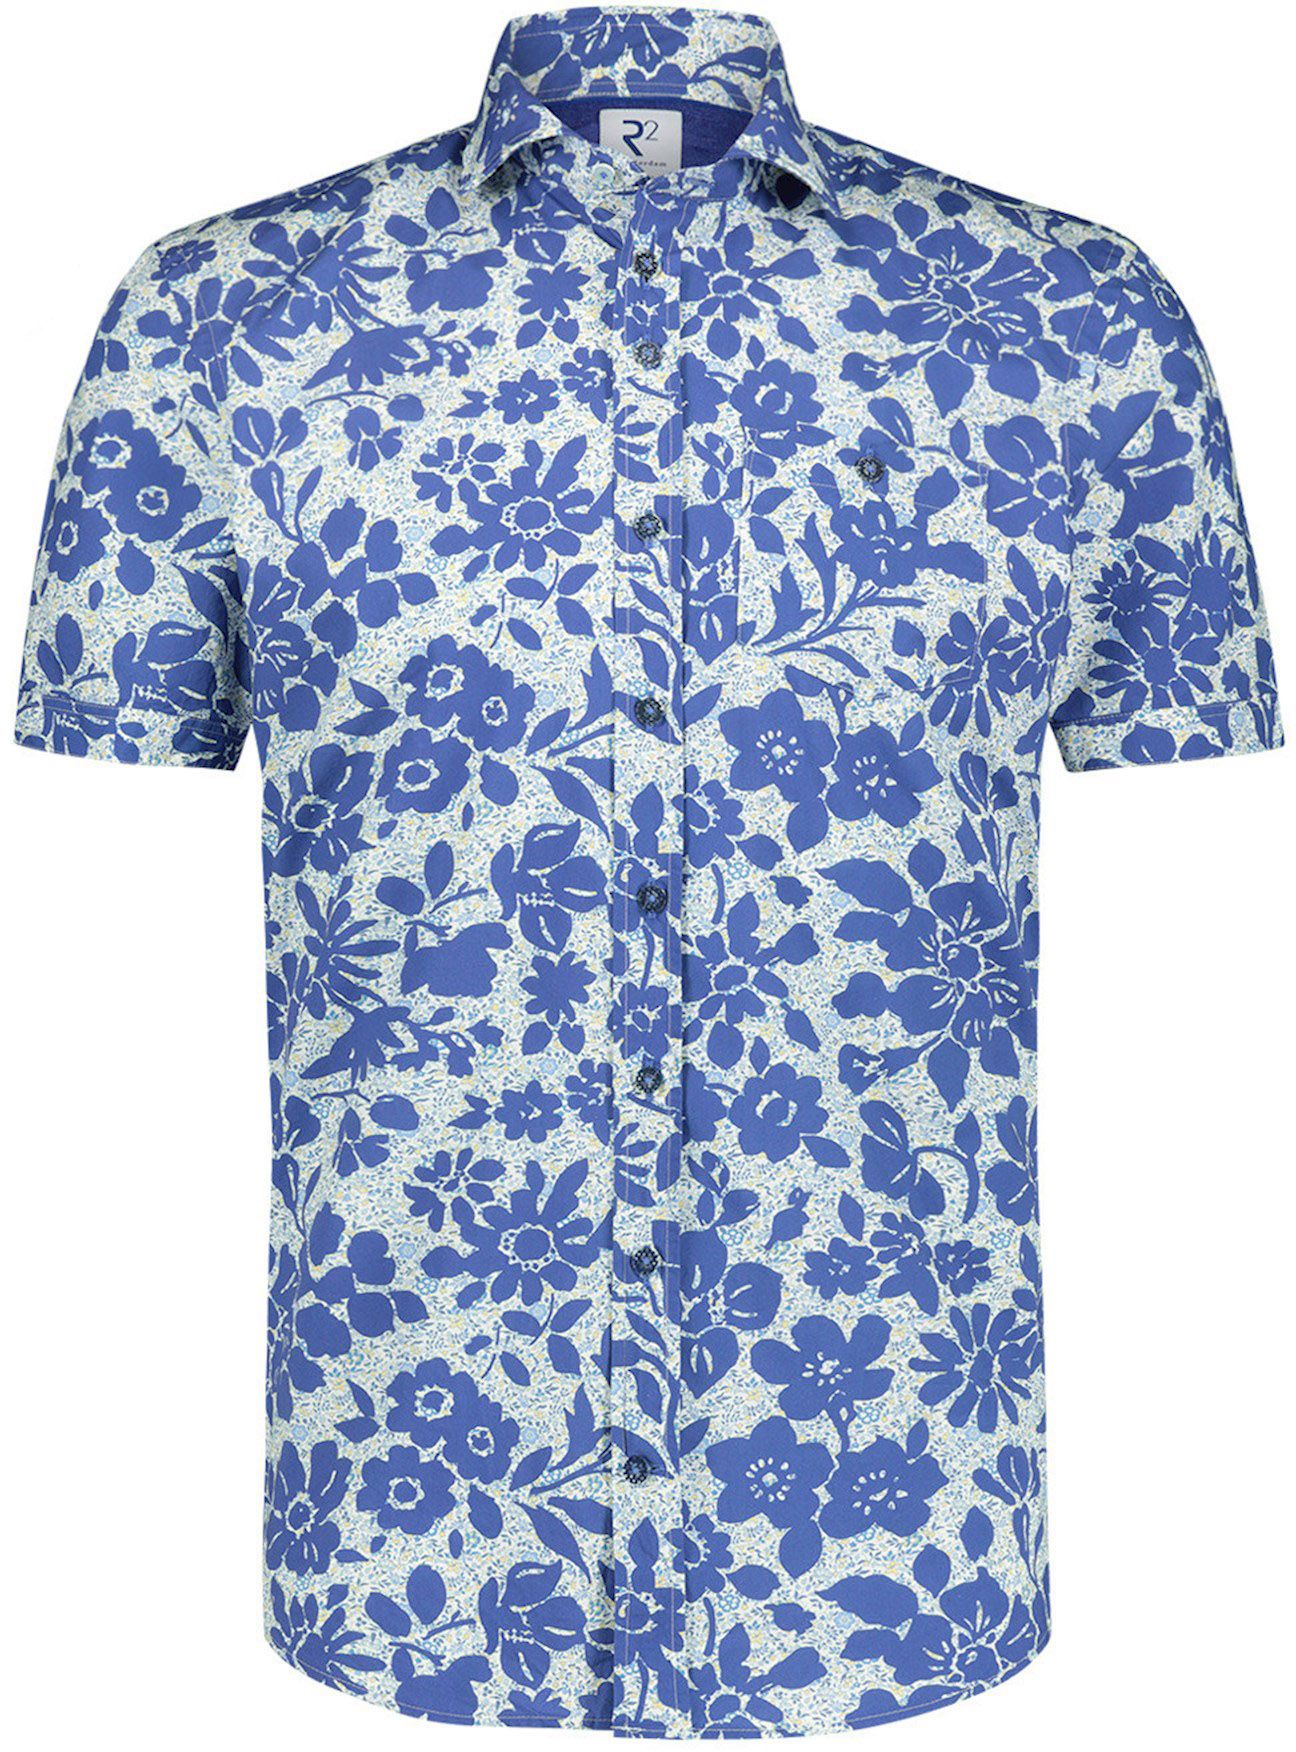 R2 Shirt Short Sleeves Floral Blue size 14.5